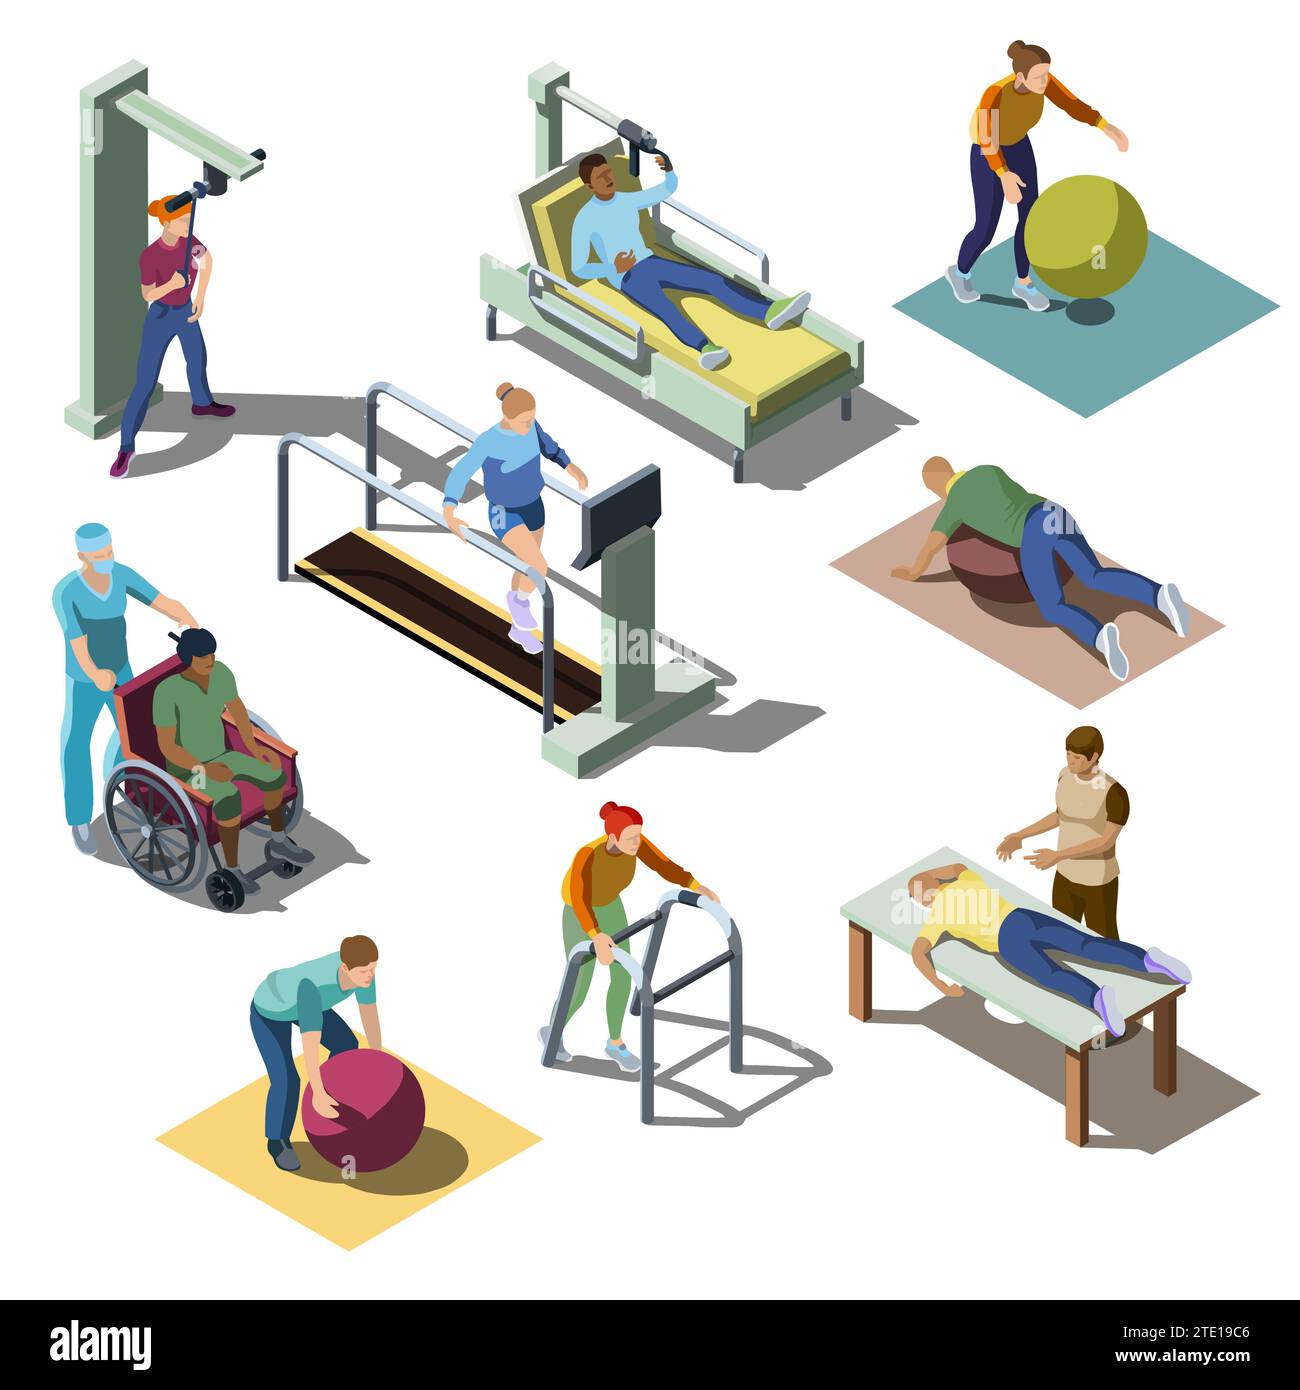 Isometric rehabilitation medical center with human characters. People with musculoskeletal disorders do physical therapy exercises, patients on the recovery and treatment program. Healthcare concept. Stock Vector